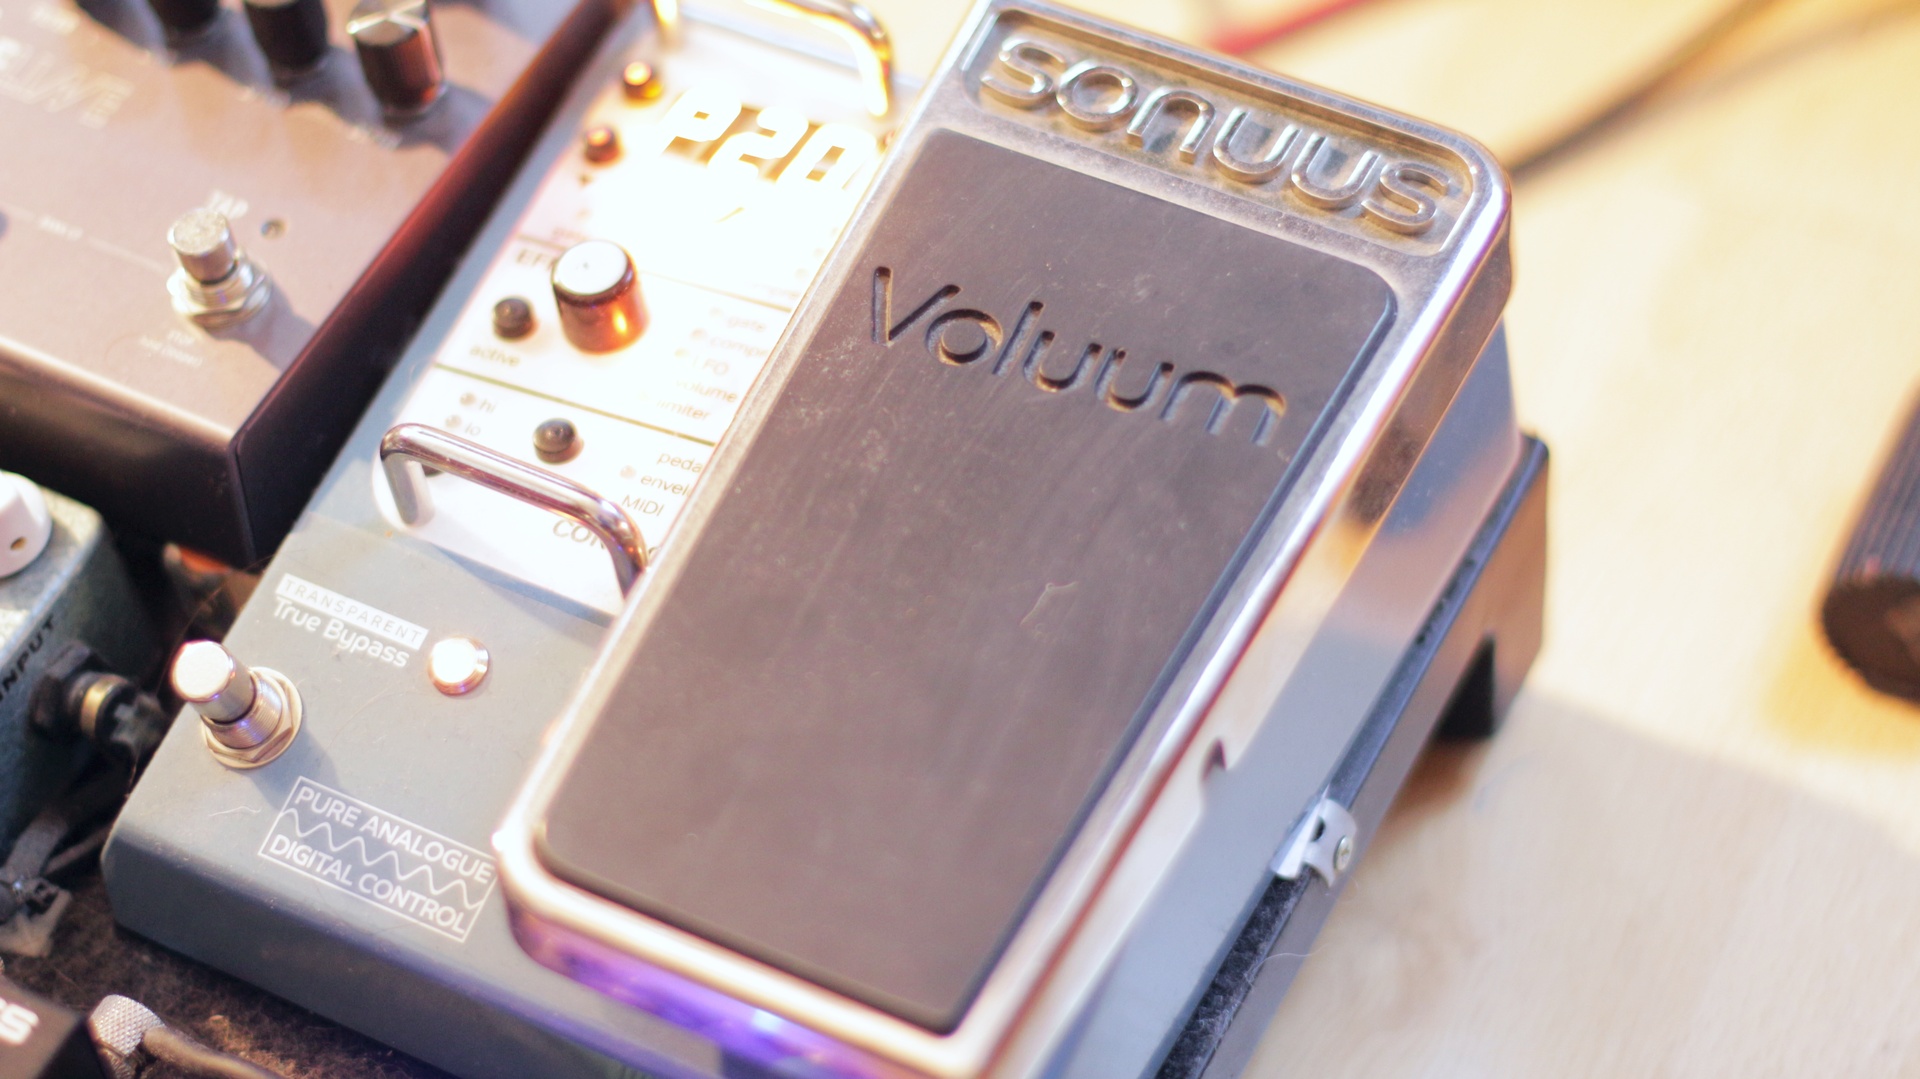 Sonuus Voluum effects pedal on a pedal board